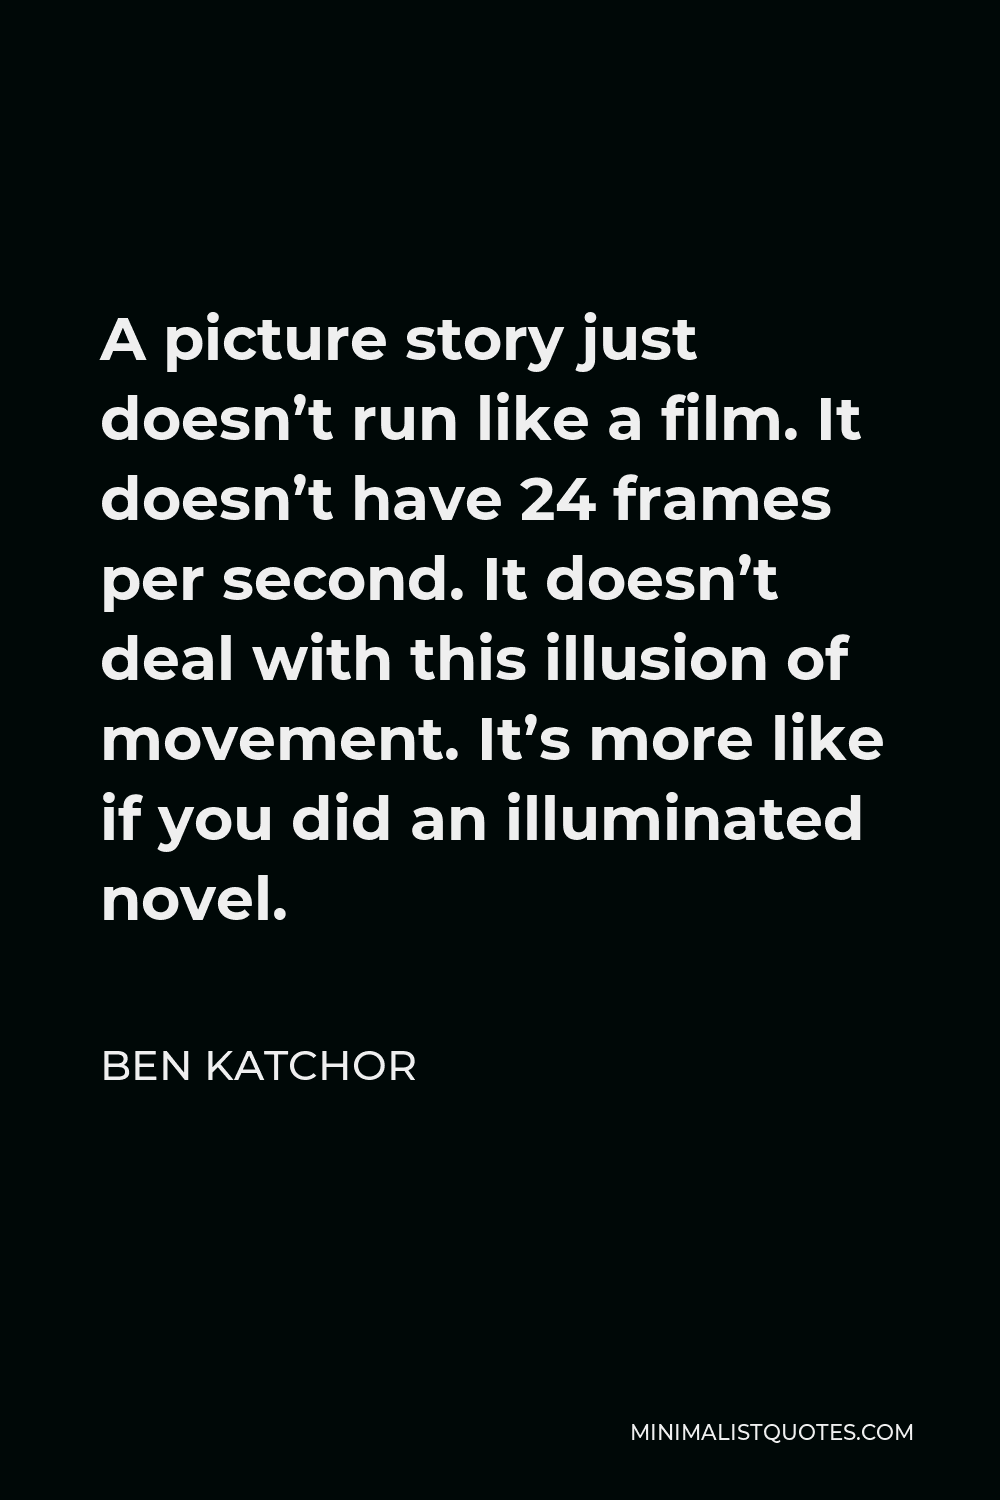 Ben Katchor Quote - A picture story just doesn’t run like a film. It doesn’t have 24 frames per second. It doesn’t deal with this illusion of movement. It’s more like if you did an illuminated novel.